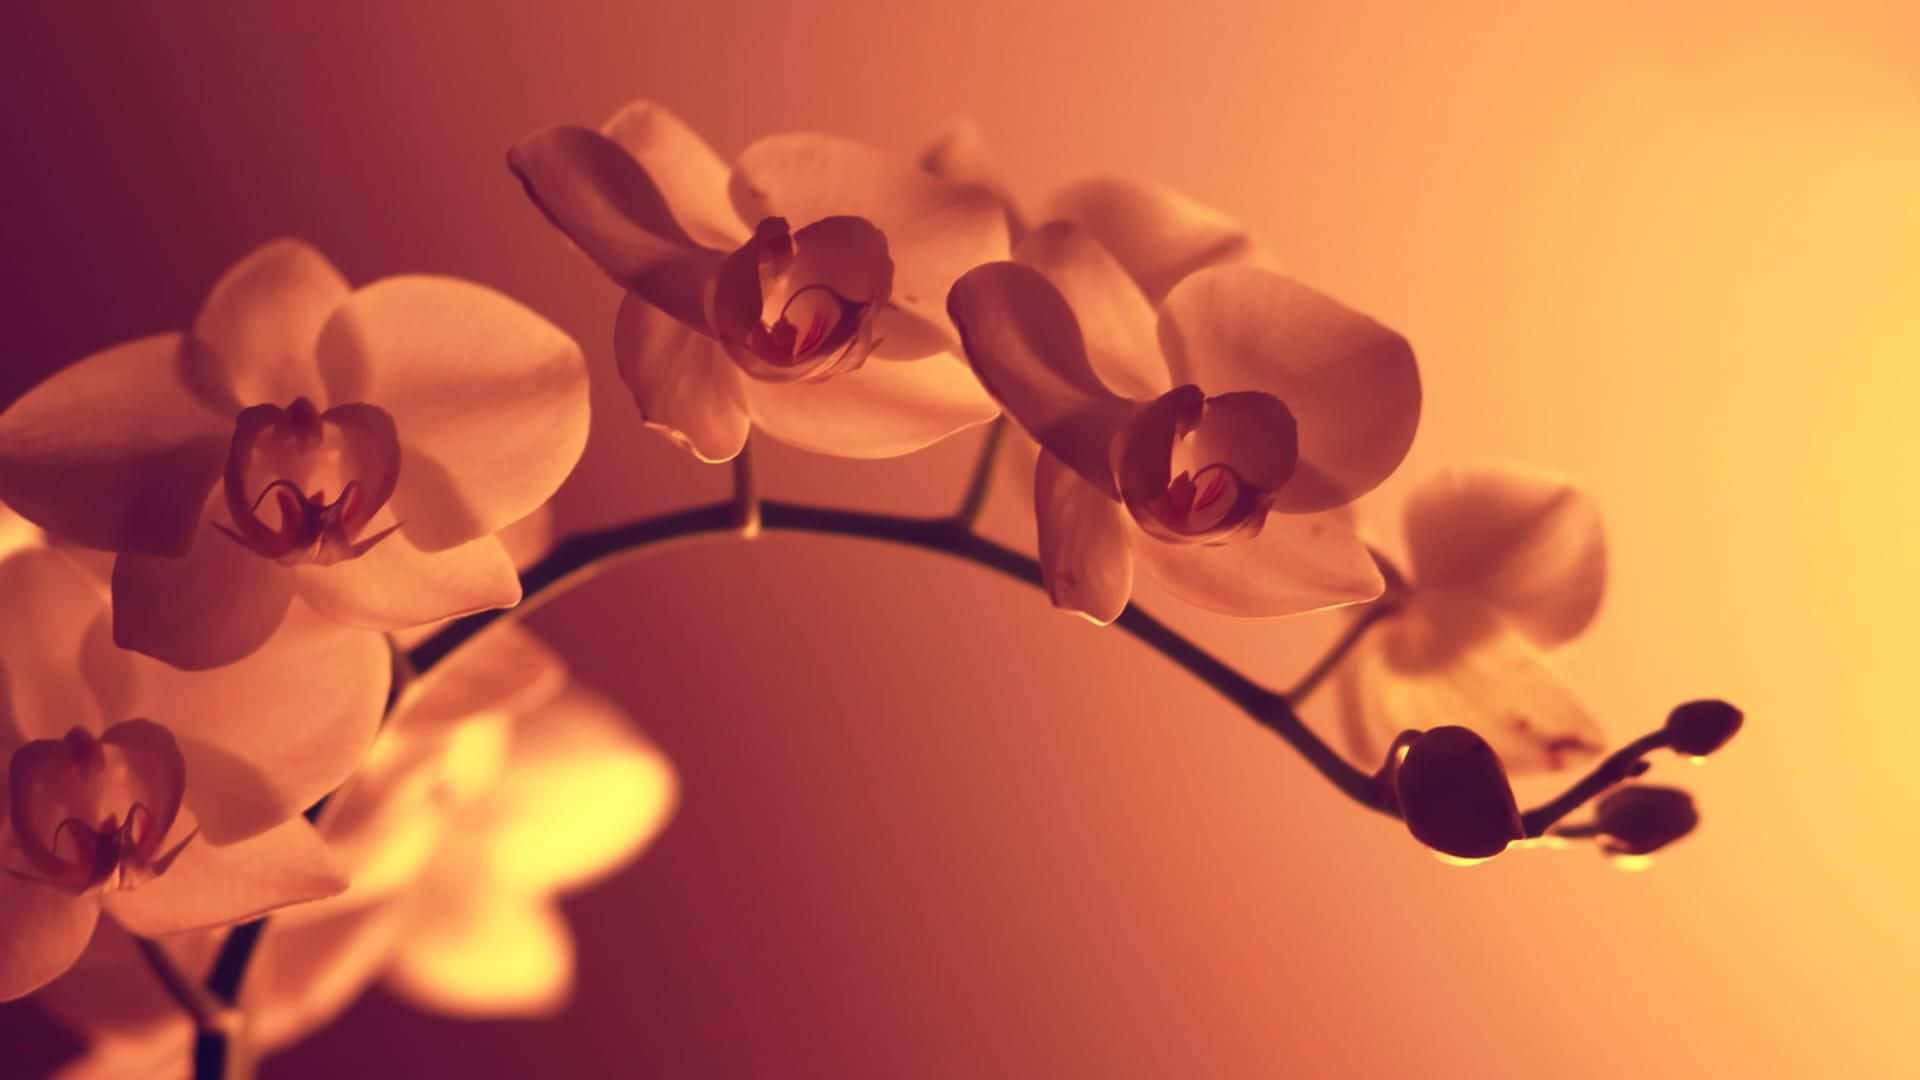 Orchids Wallpapers Hd - Wallpapers For Desktop